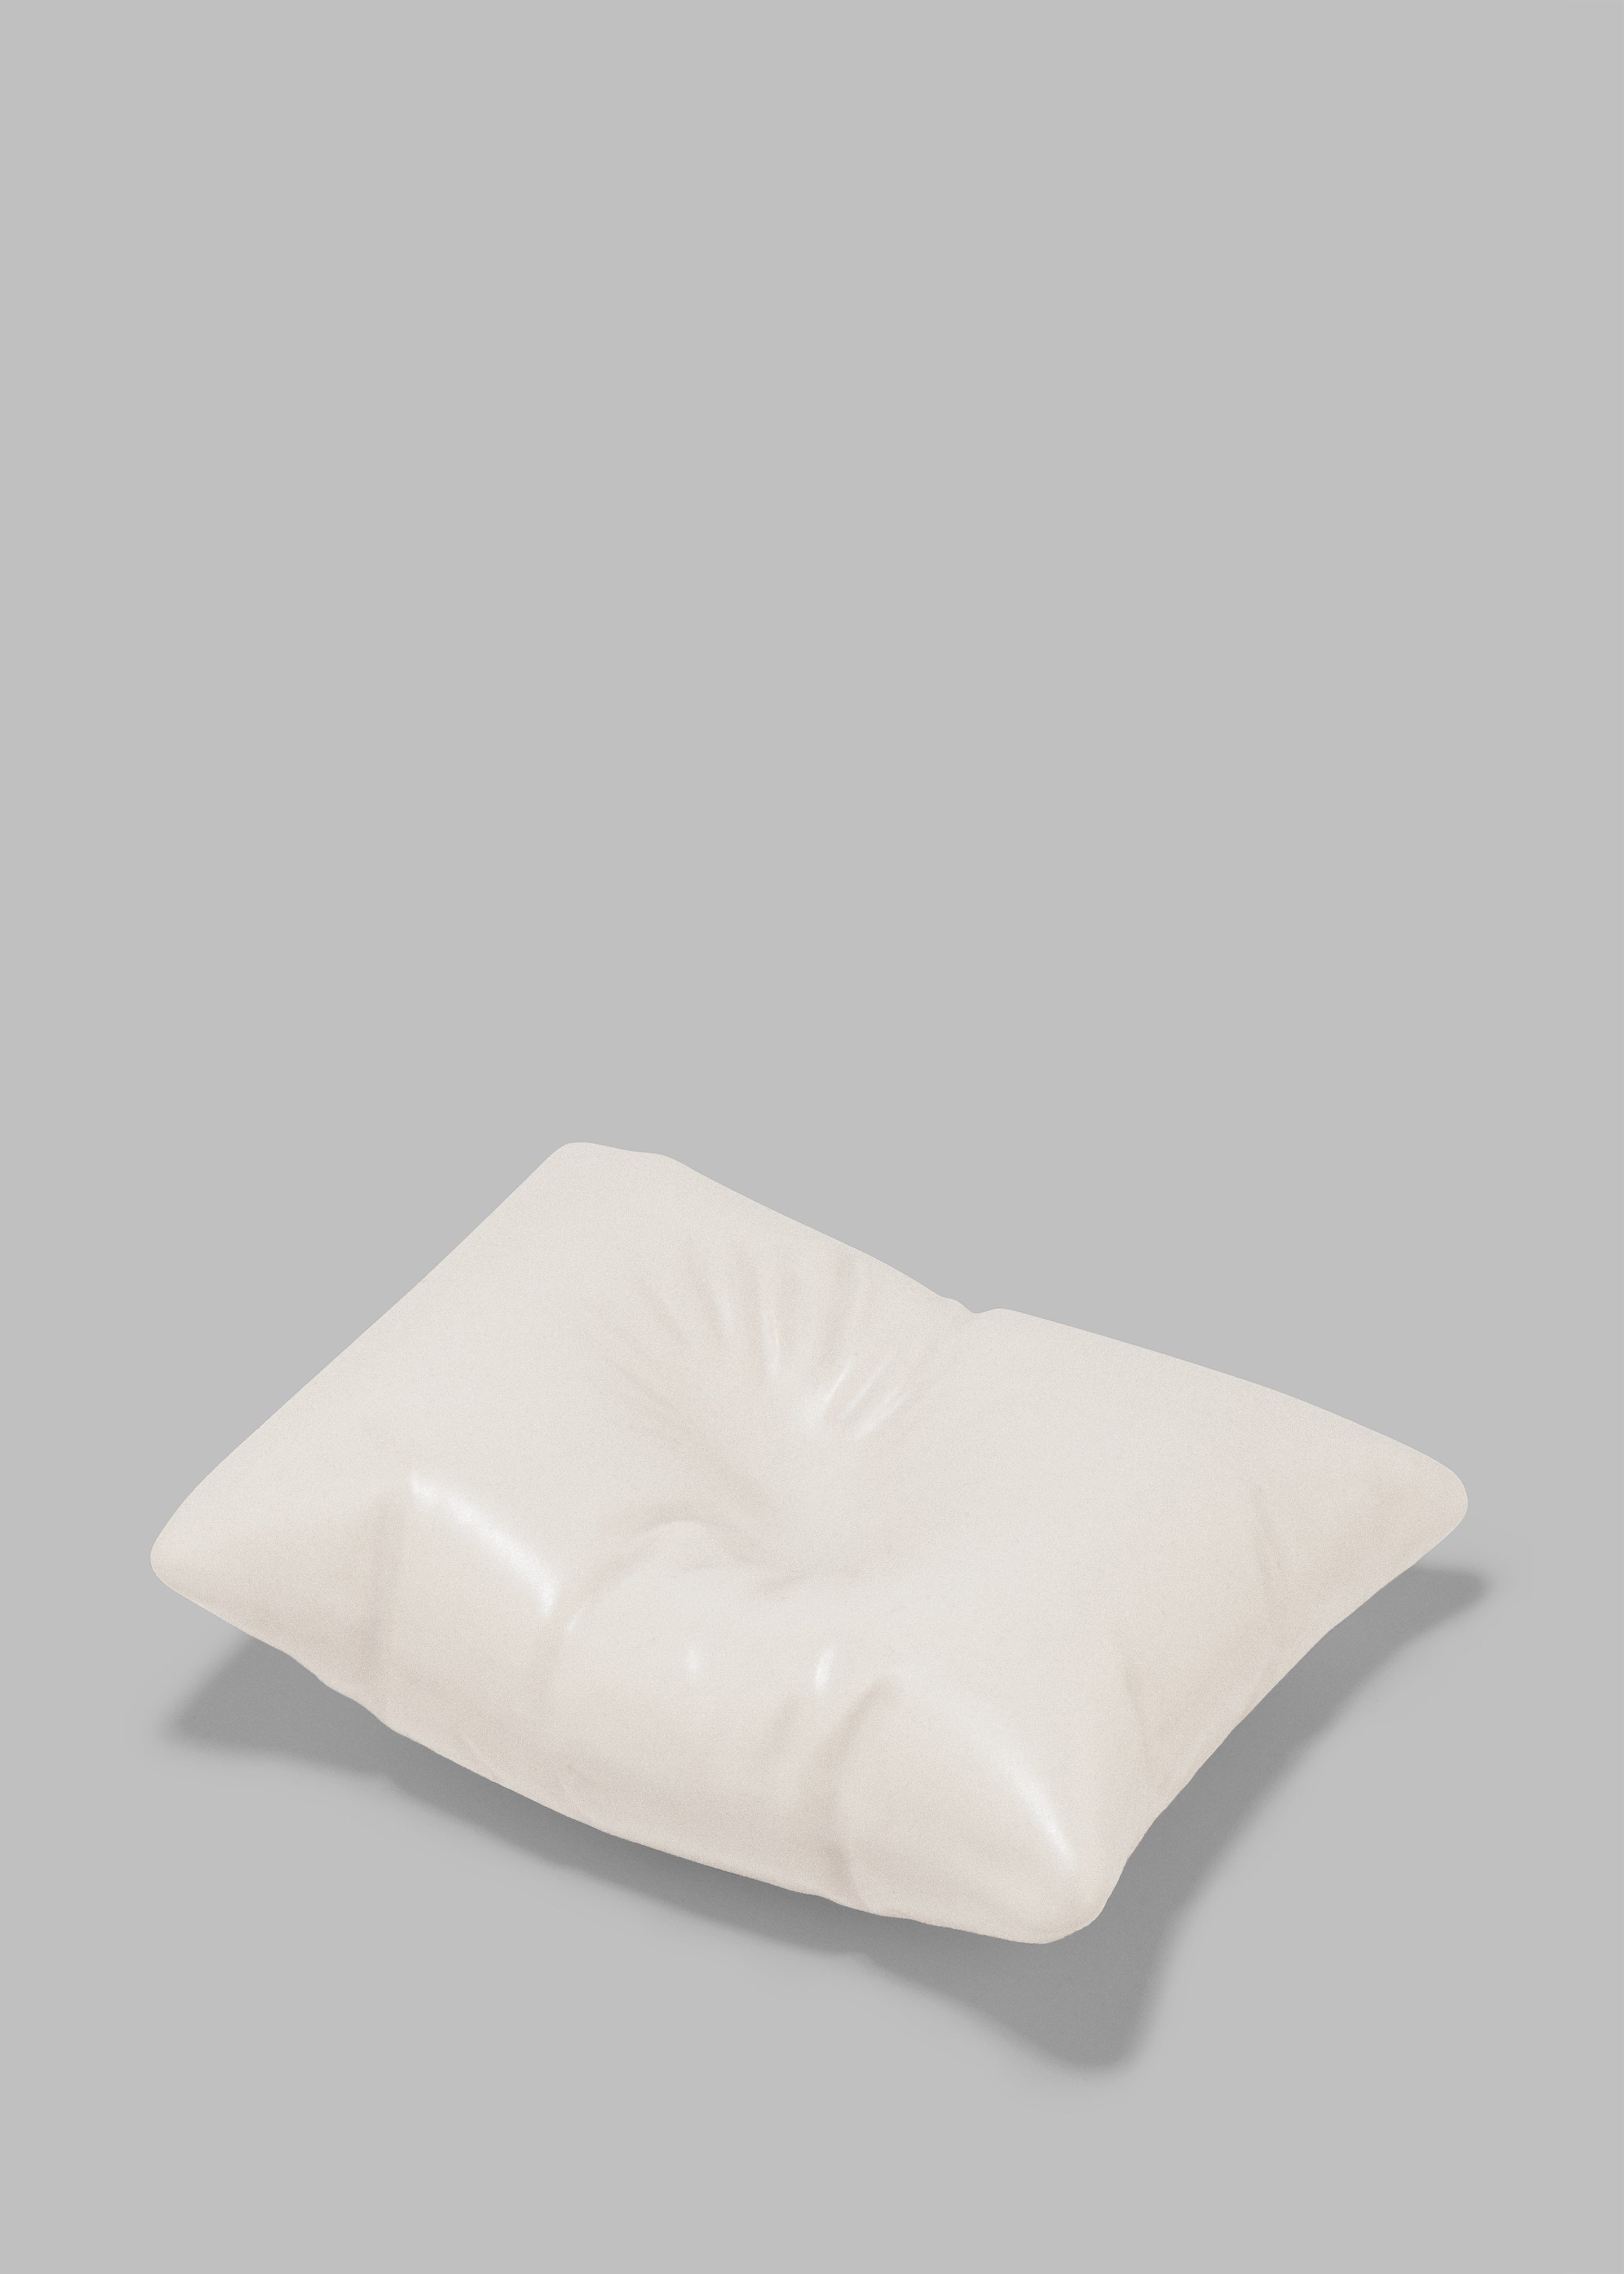 Completedworks Bumped Ceramic Cushion - Matte White - 3